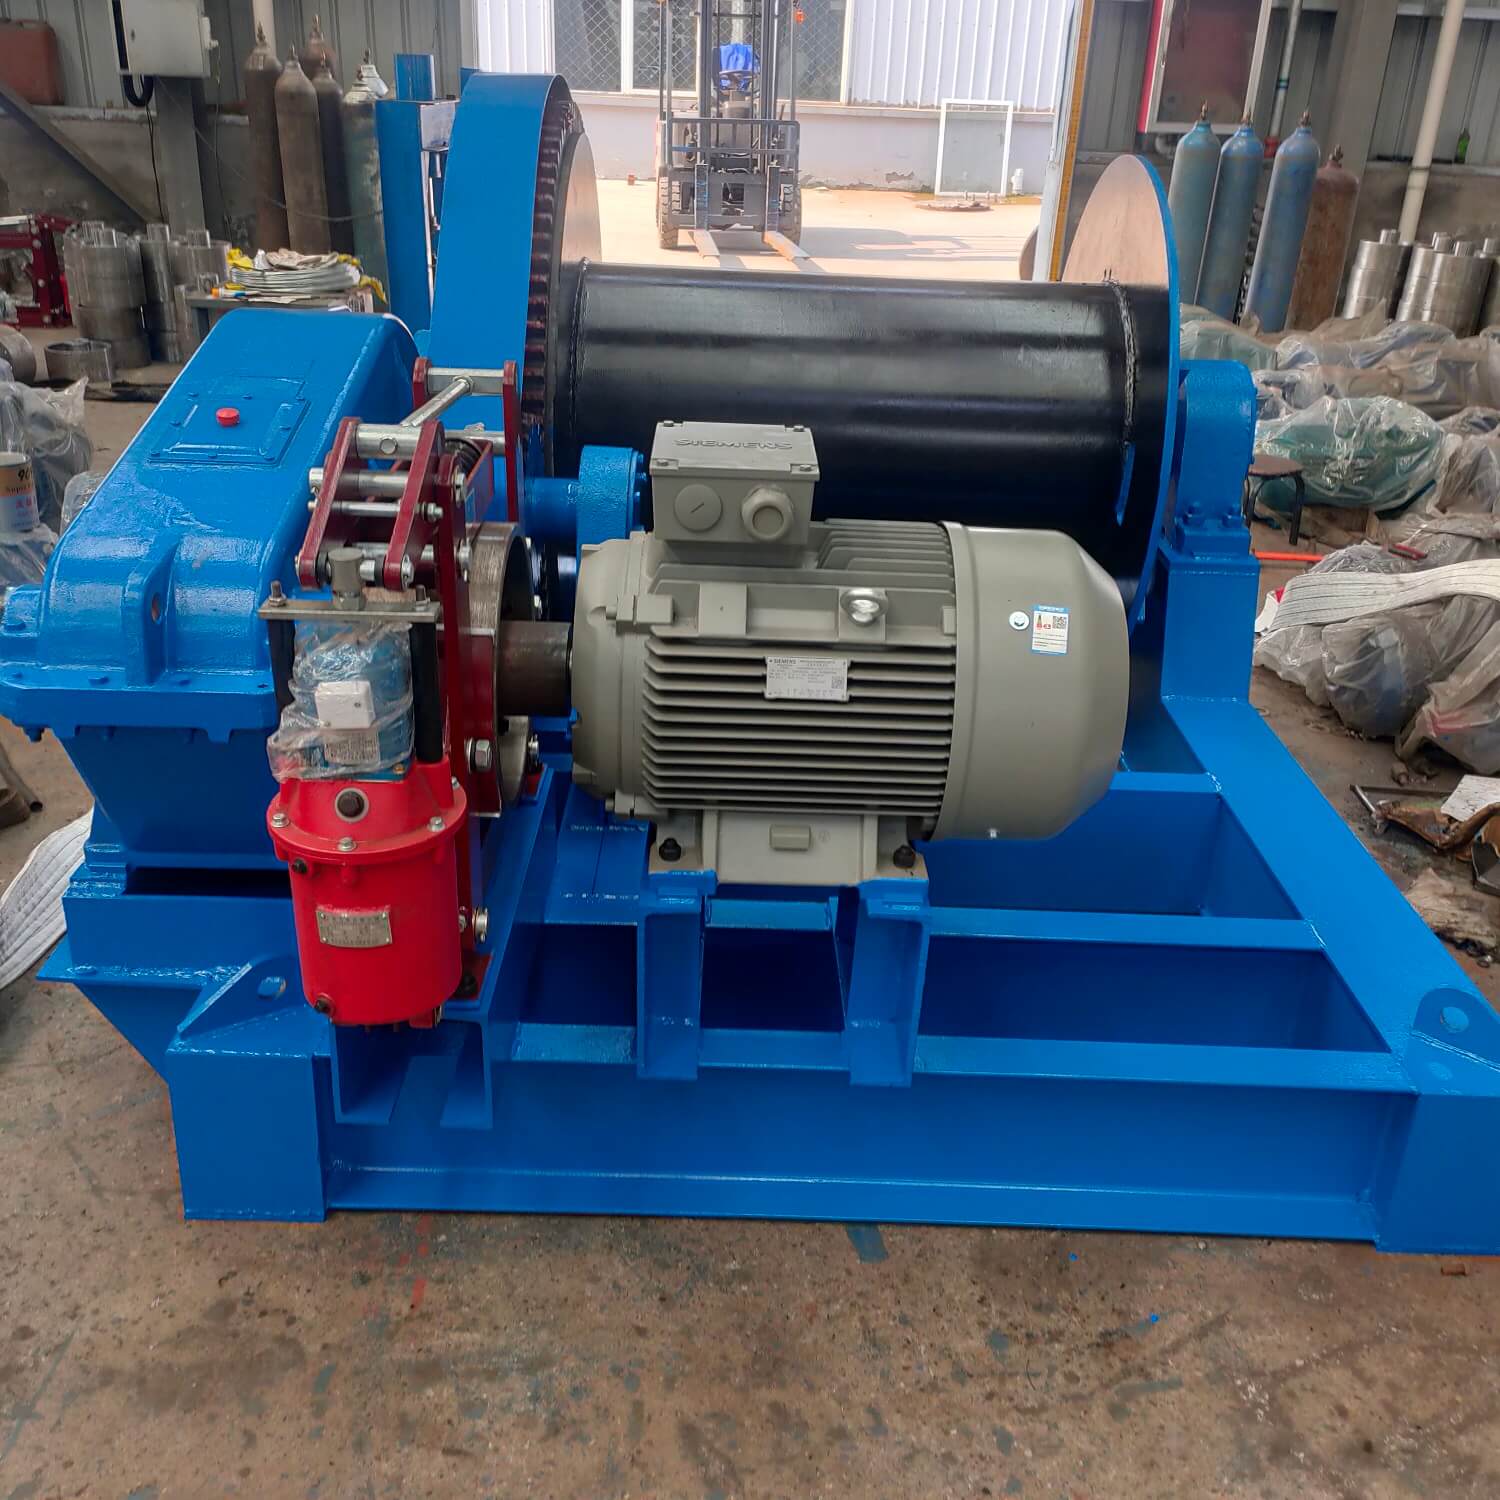 Site photos of 16 ton Building Electric Winch (Pulling cable winch)-1.jpg